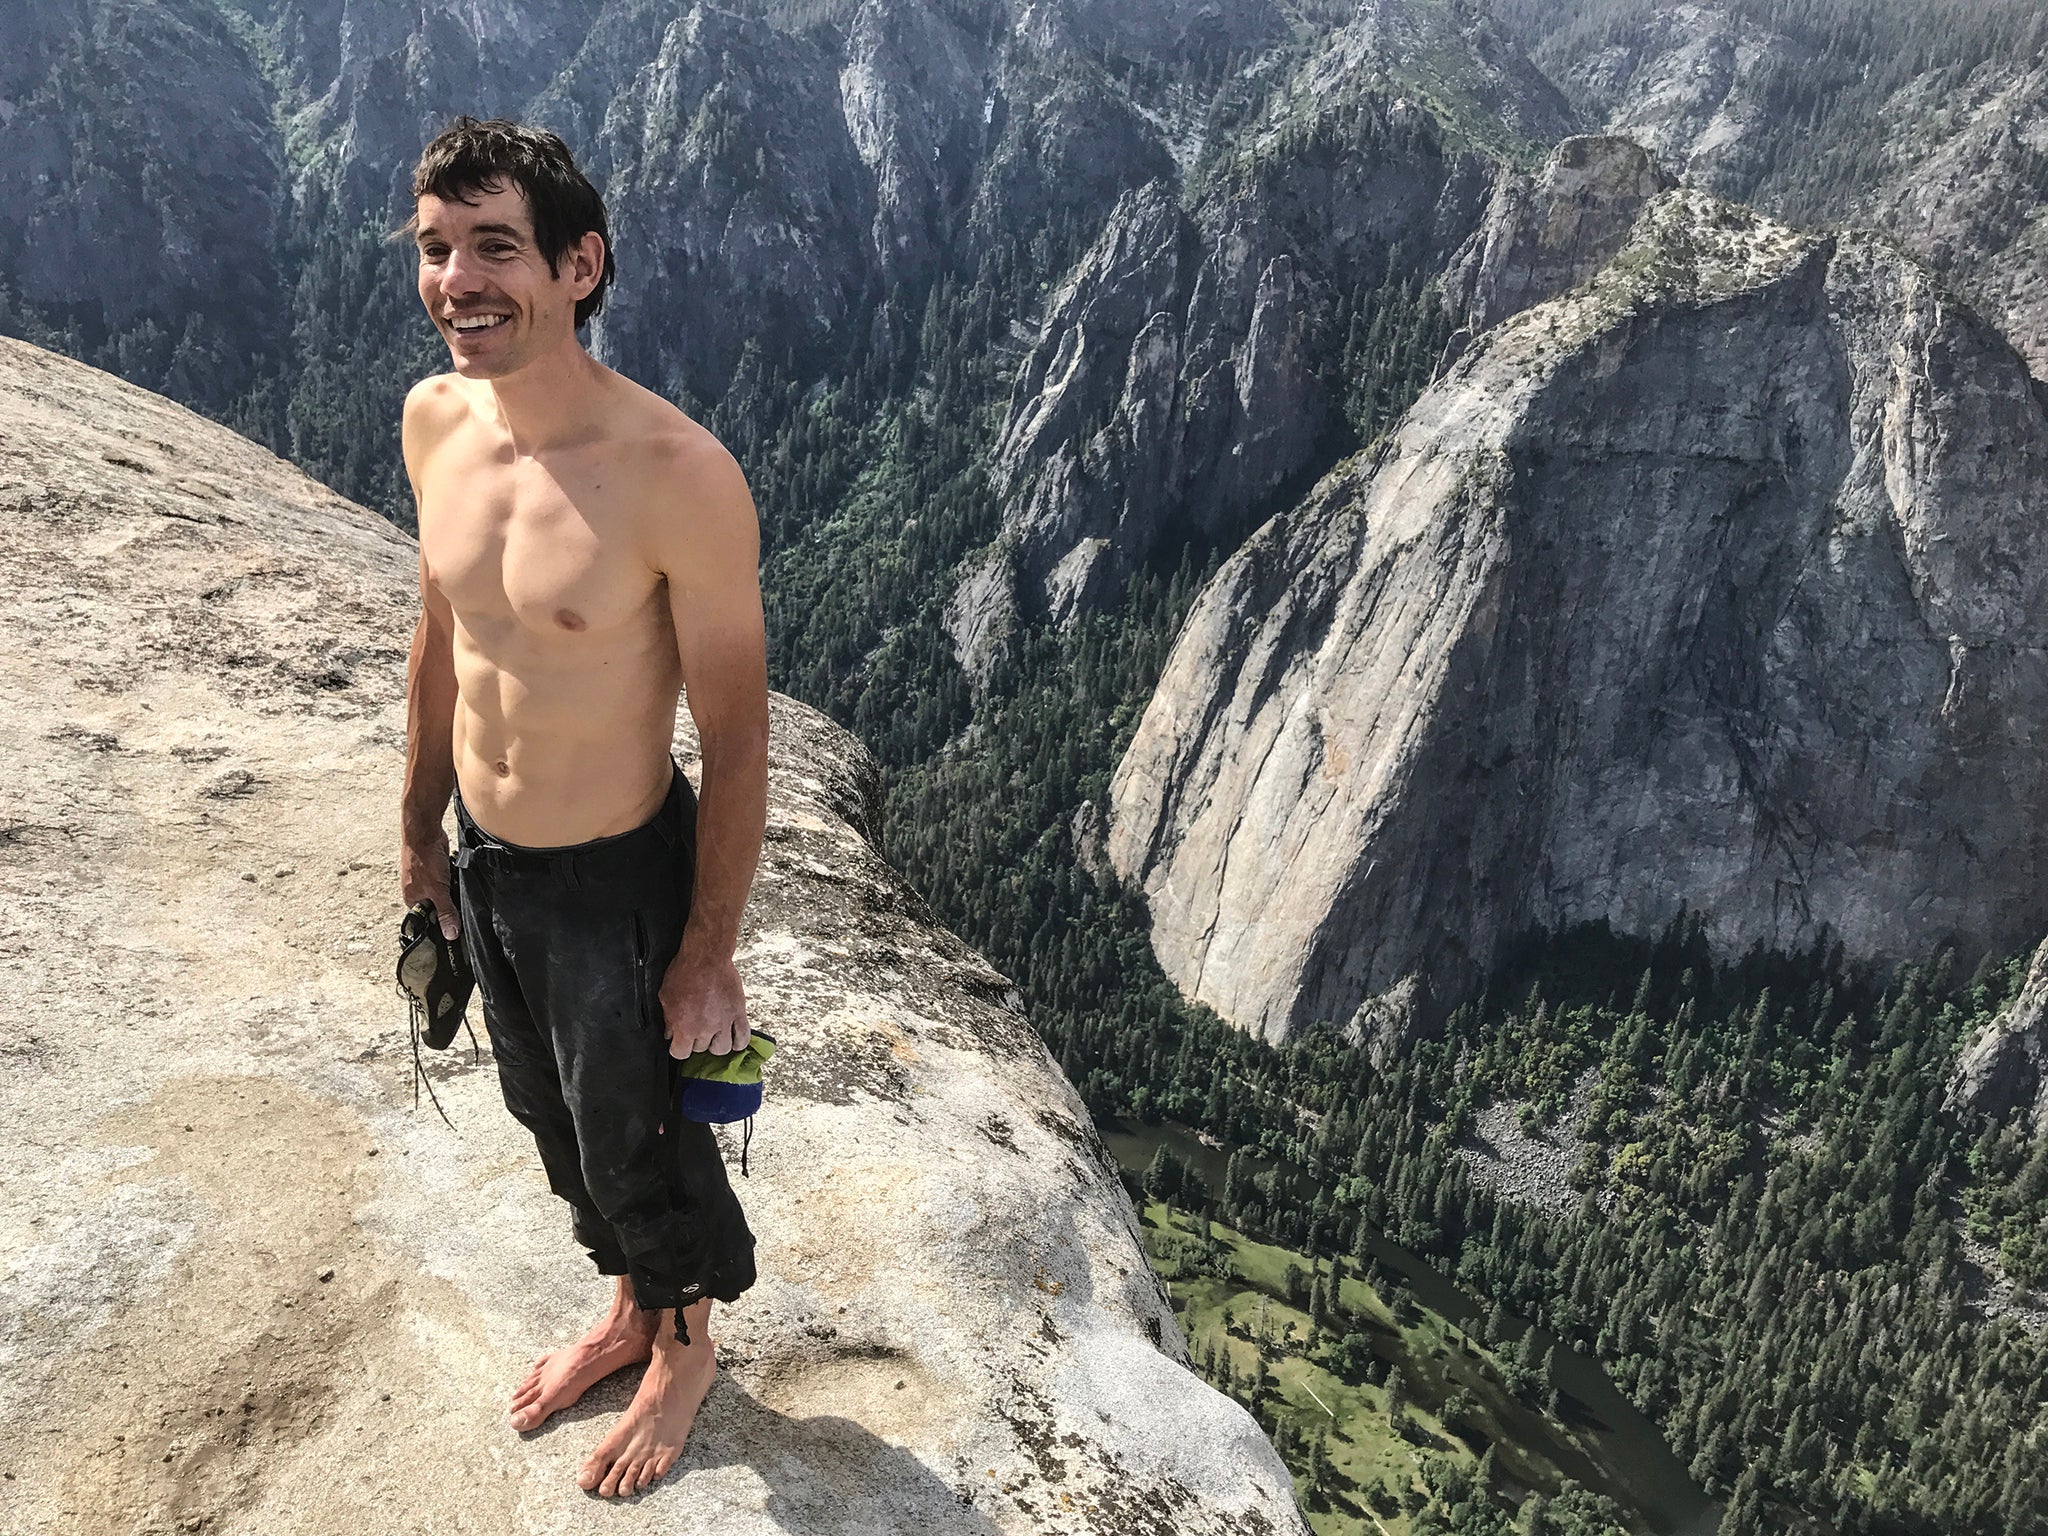 Honnold estimates he has free-solo climbed more than 35 routes